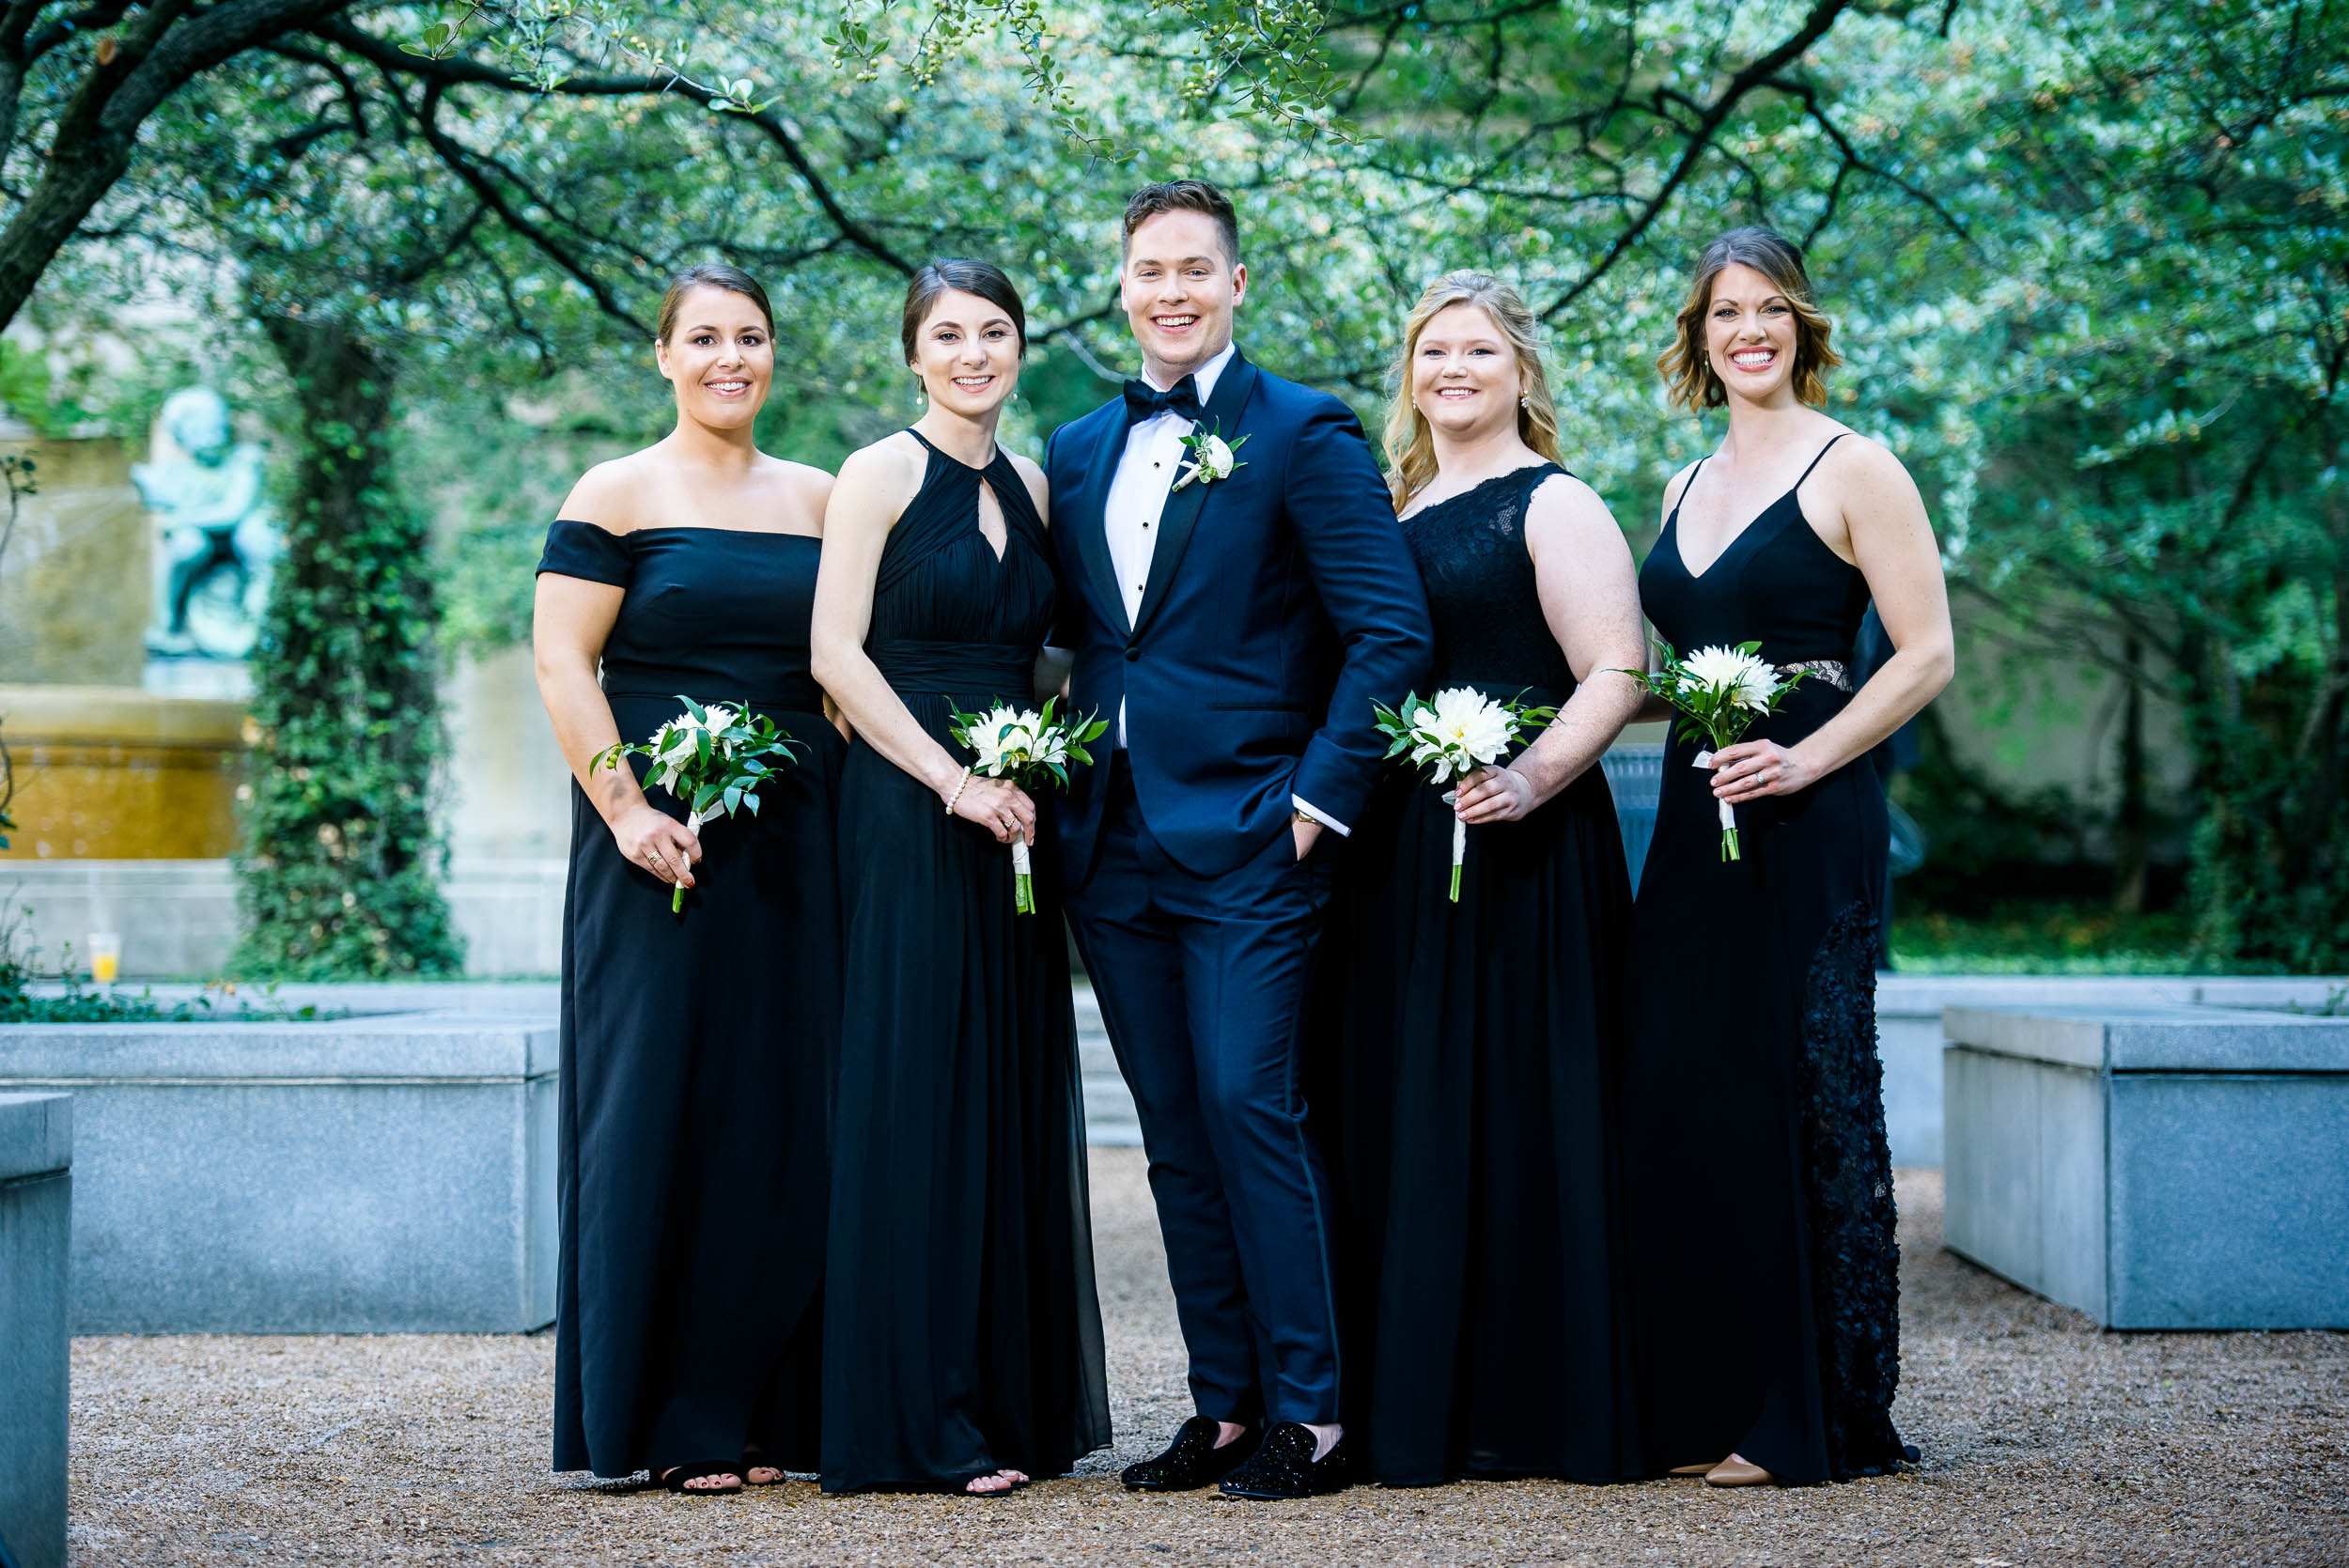 Groom posing with wedding party for luxurious fall wedding at the Chicago Symphony Center captured by J. Brown Photography. See more wedding ideas at jbrownphotography.com!